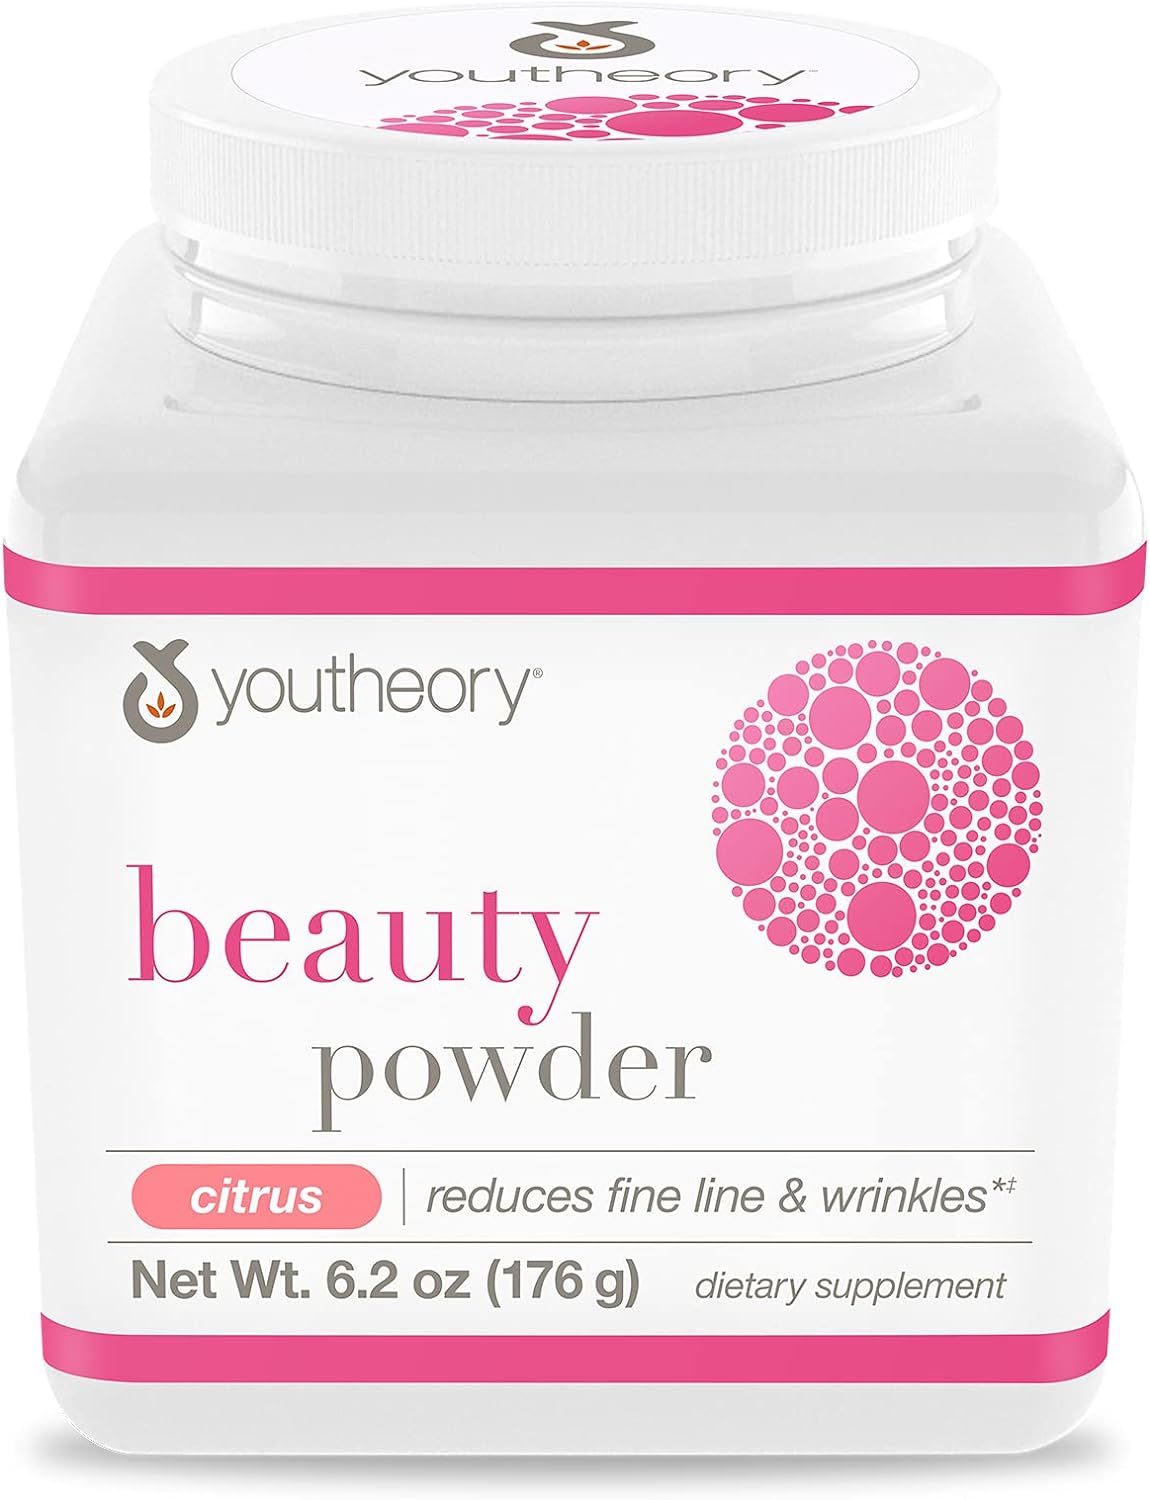 Youtheory Beauty Powder Citrus Flavor, Reduces fine Lines & wrinkels,